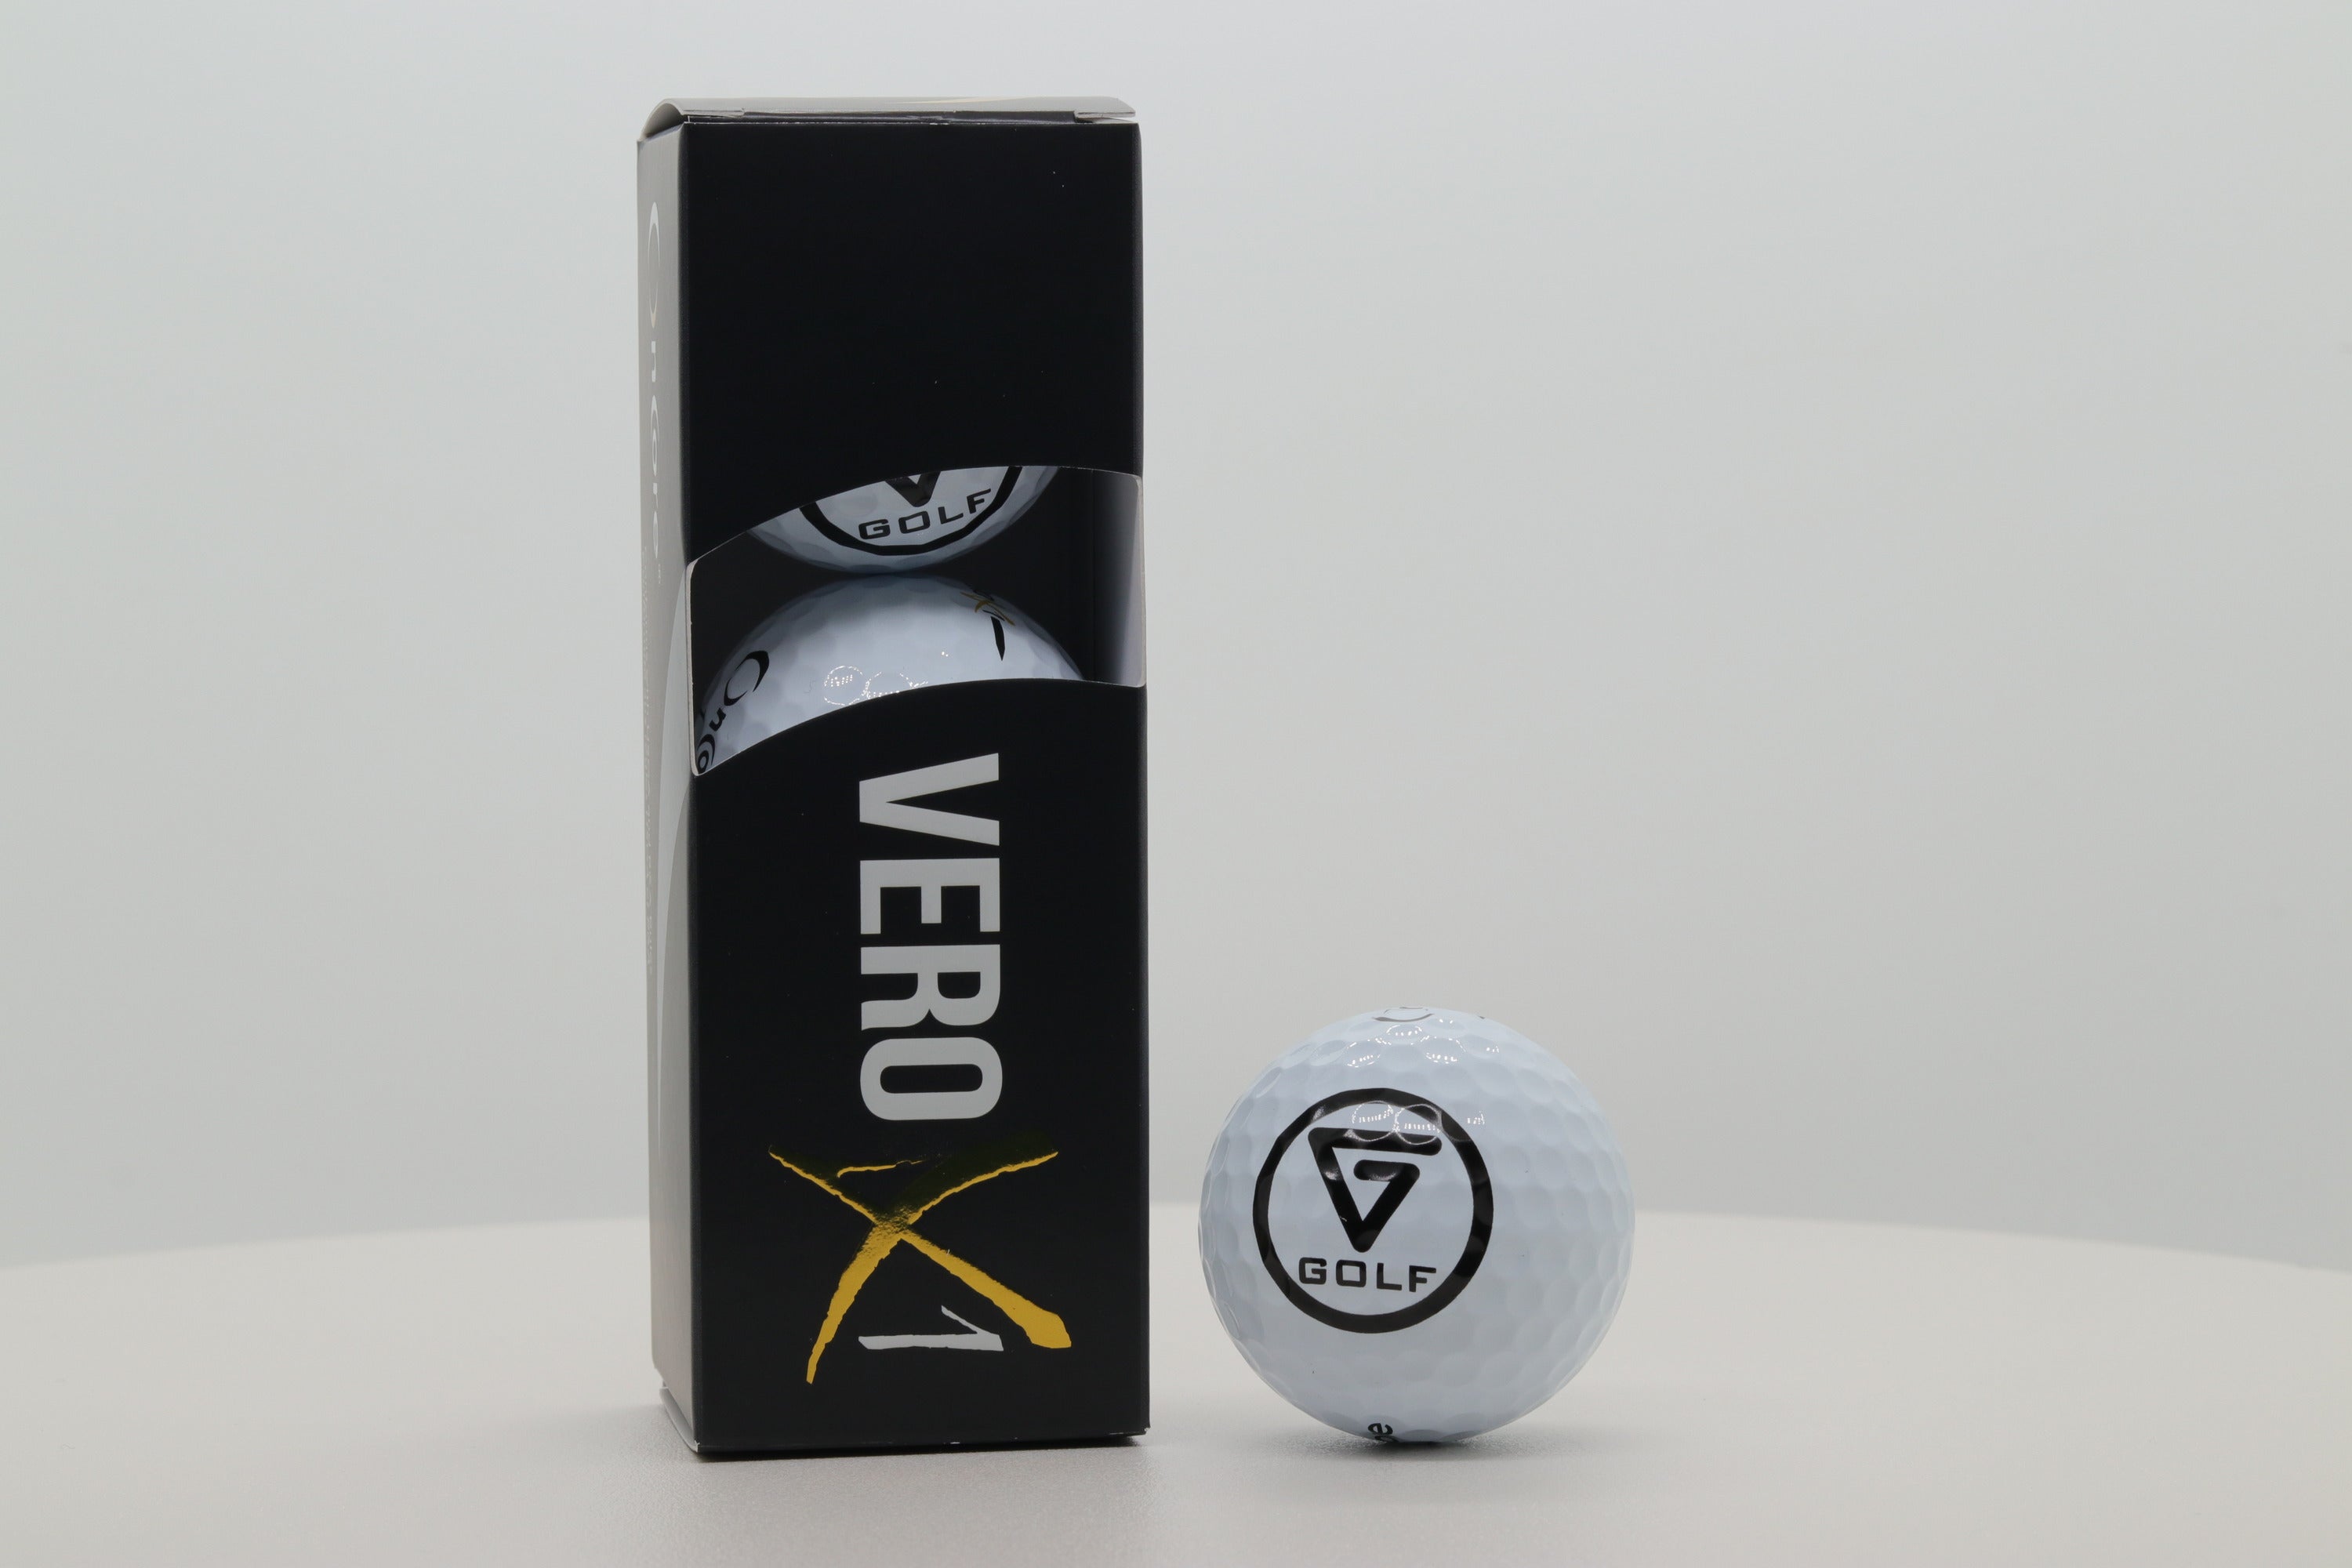 Vero x1 by Oncore Golf x Vertical Groove Golf